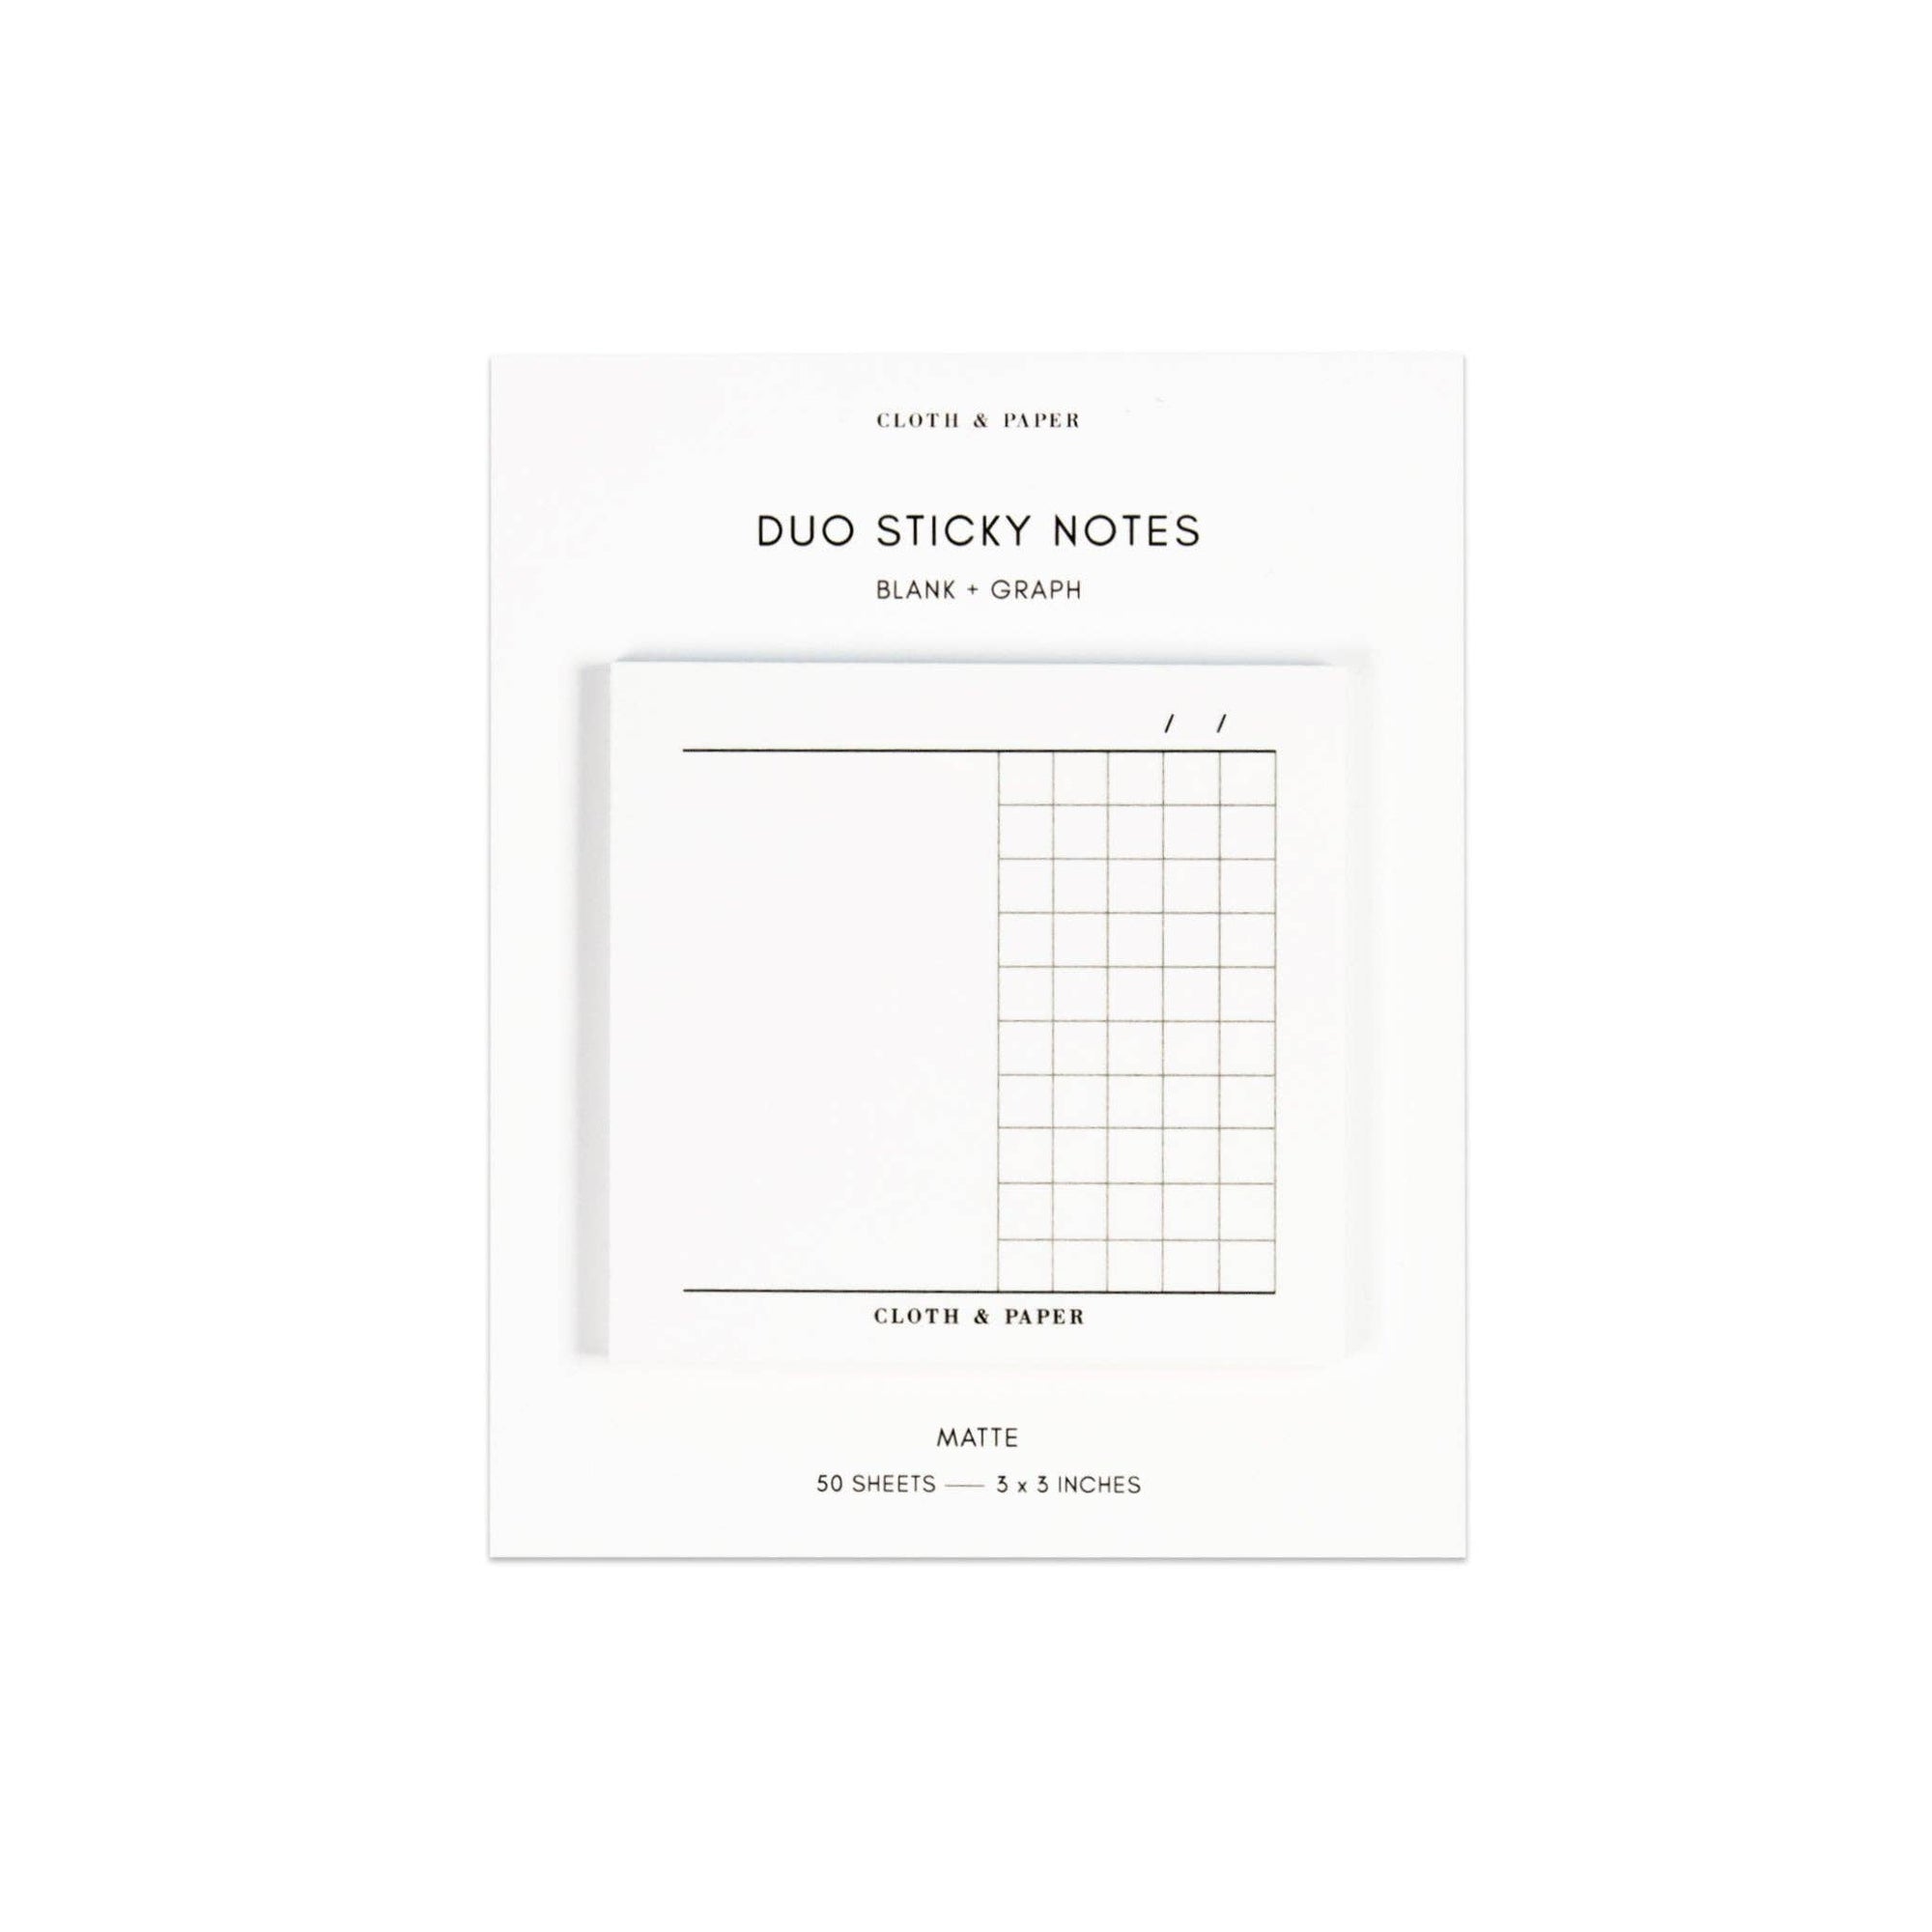 Duo Sticky Notes | Blank + Graph: White